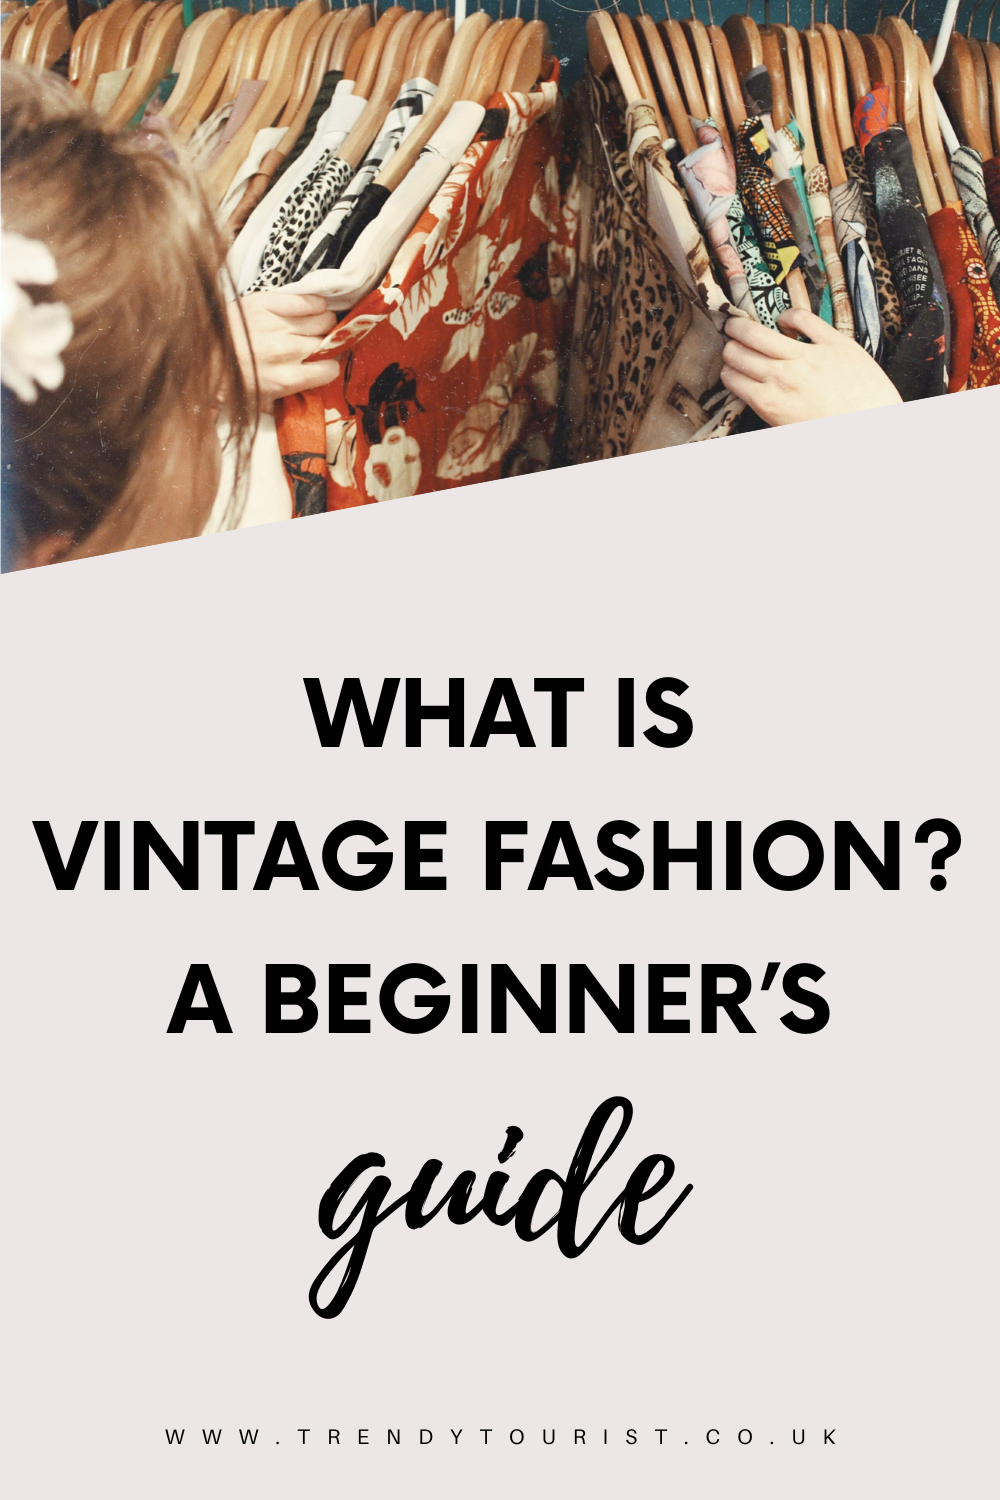 What Is Vintage Fashion? A Beginner's Guide